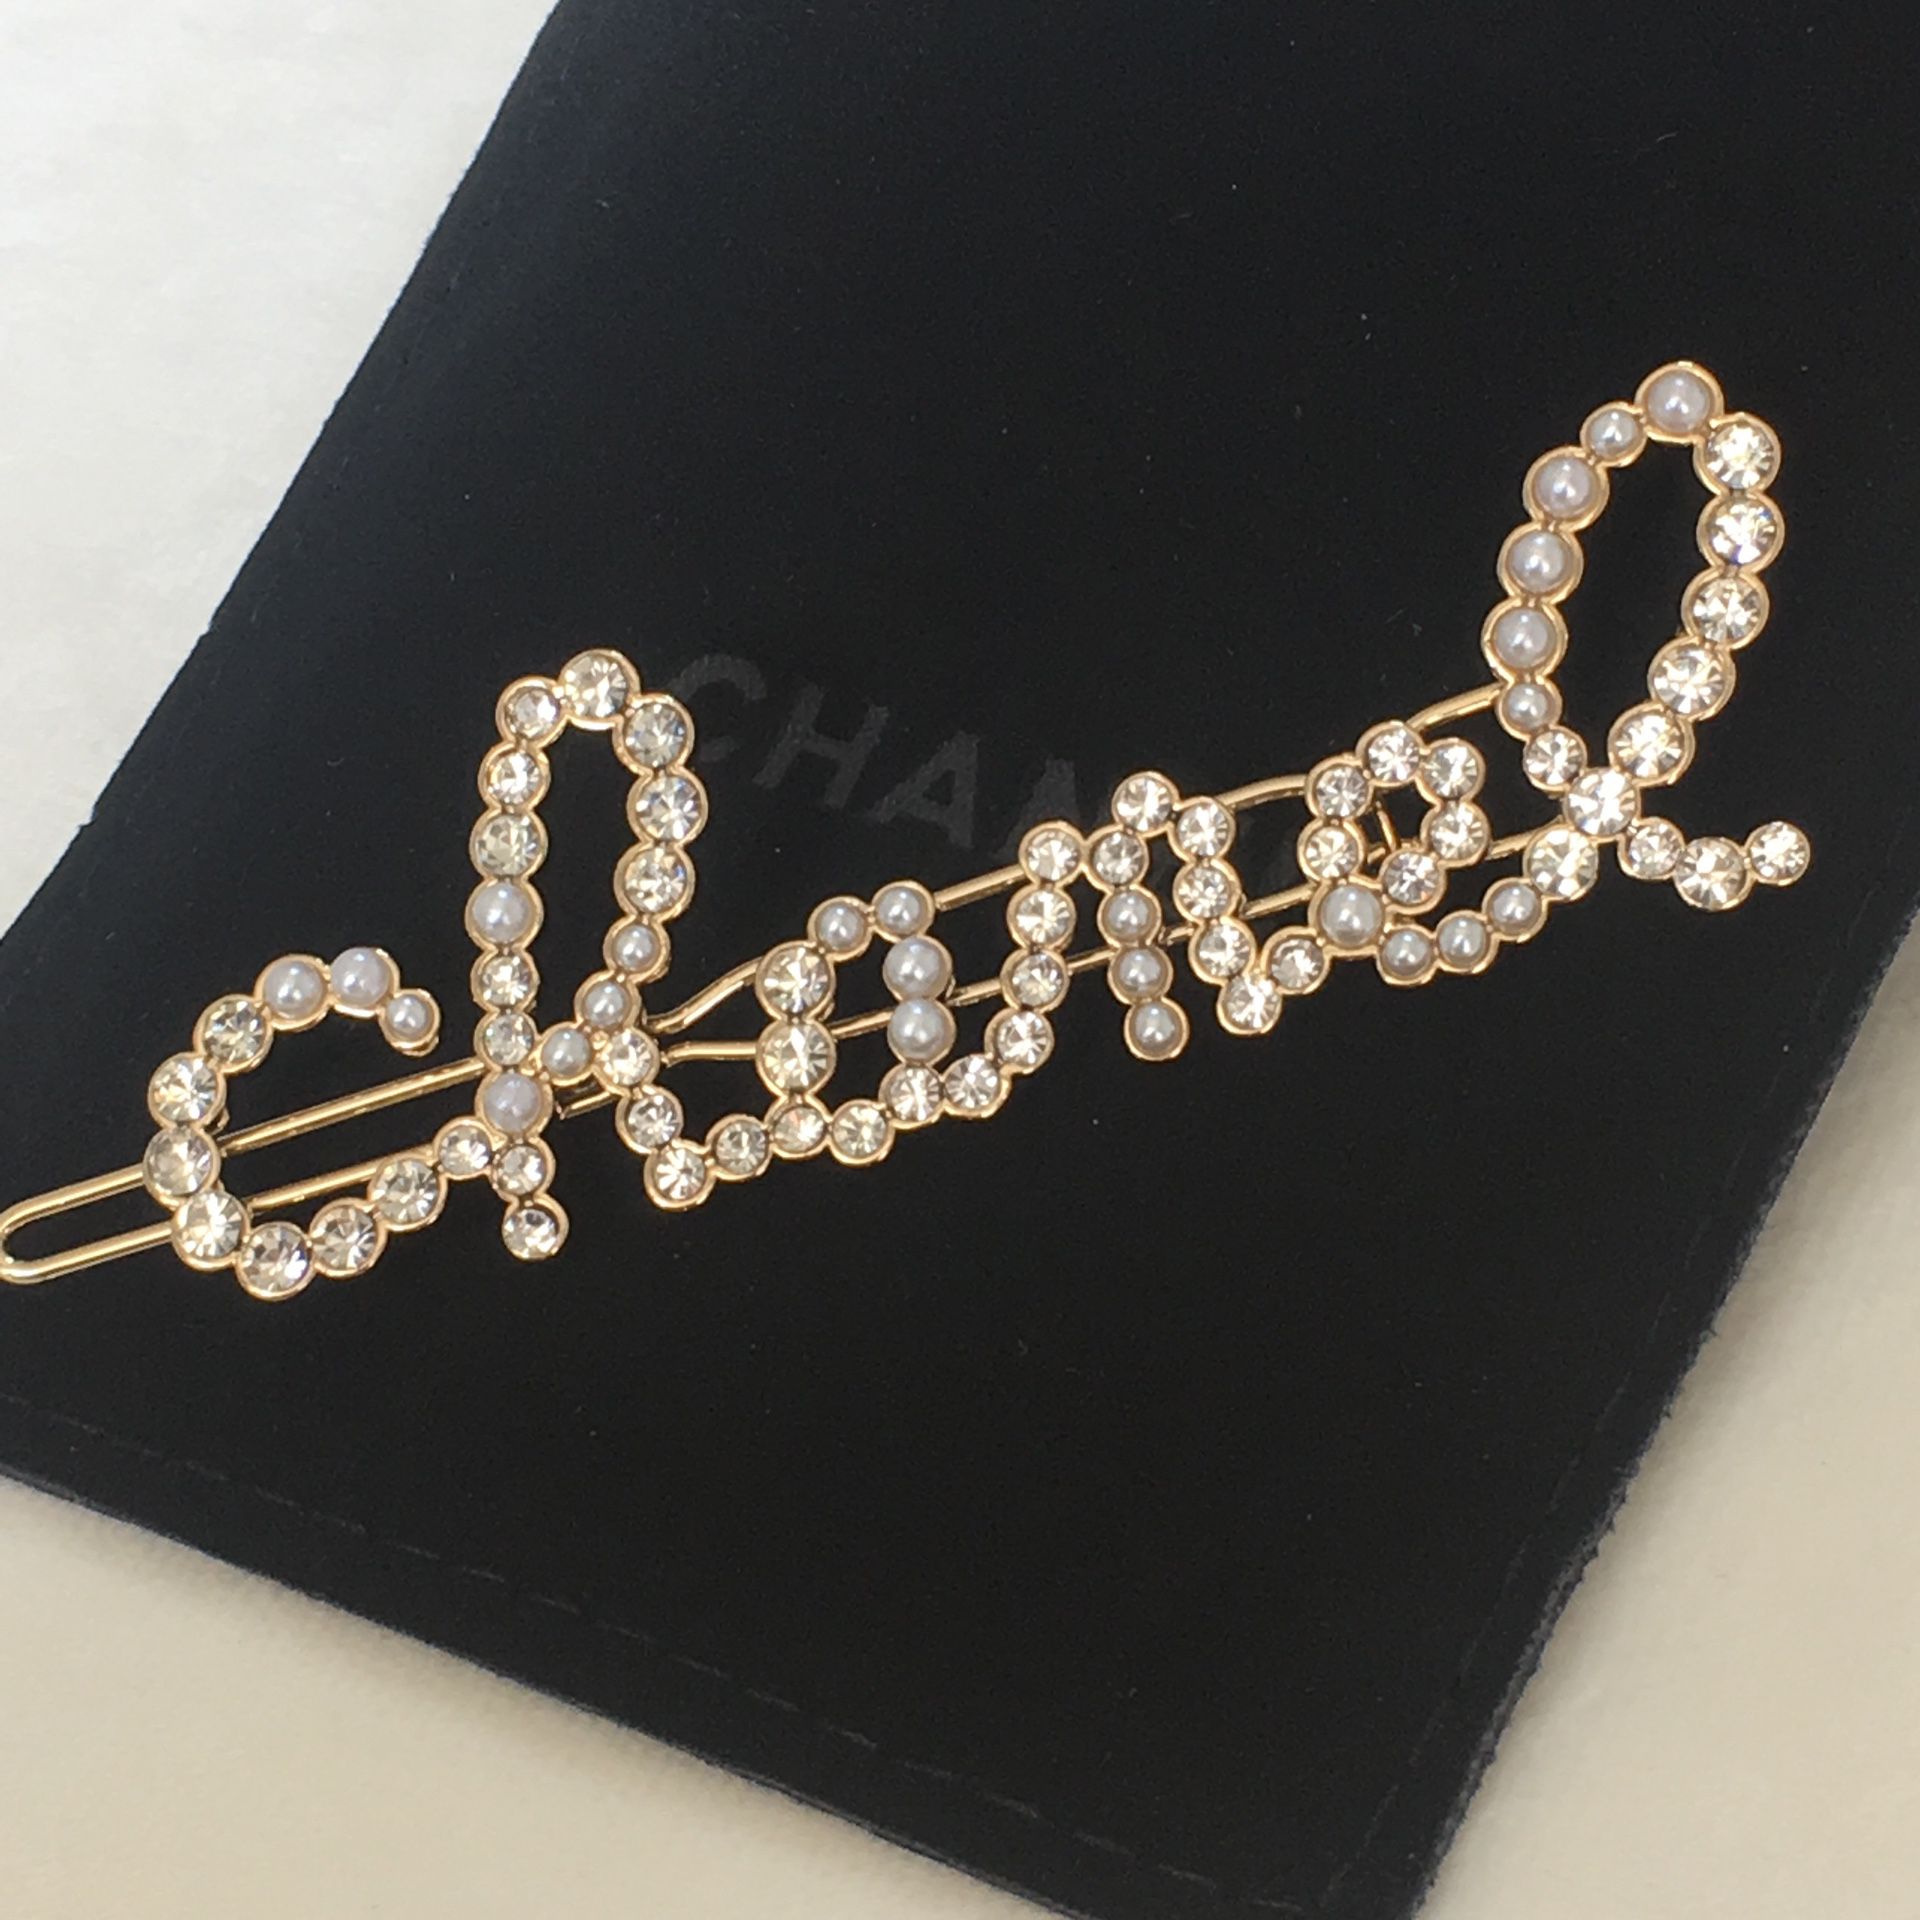 Chanel pearl hair clip with diamonds for Sale in Quartz Hill, CA - OfferUp